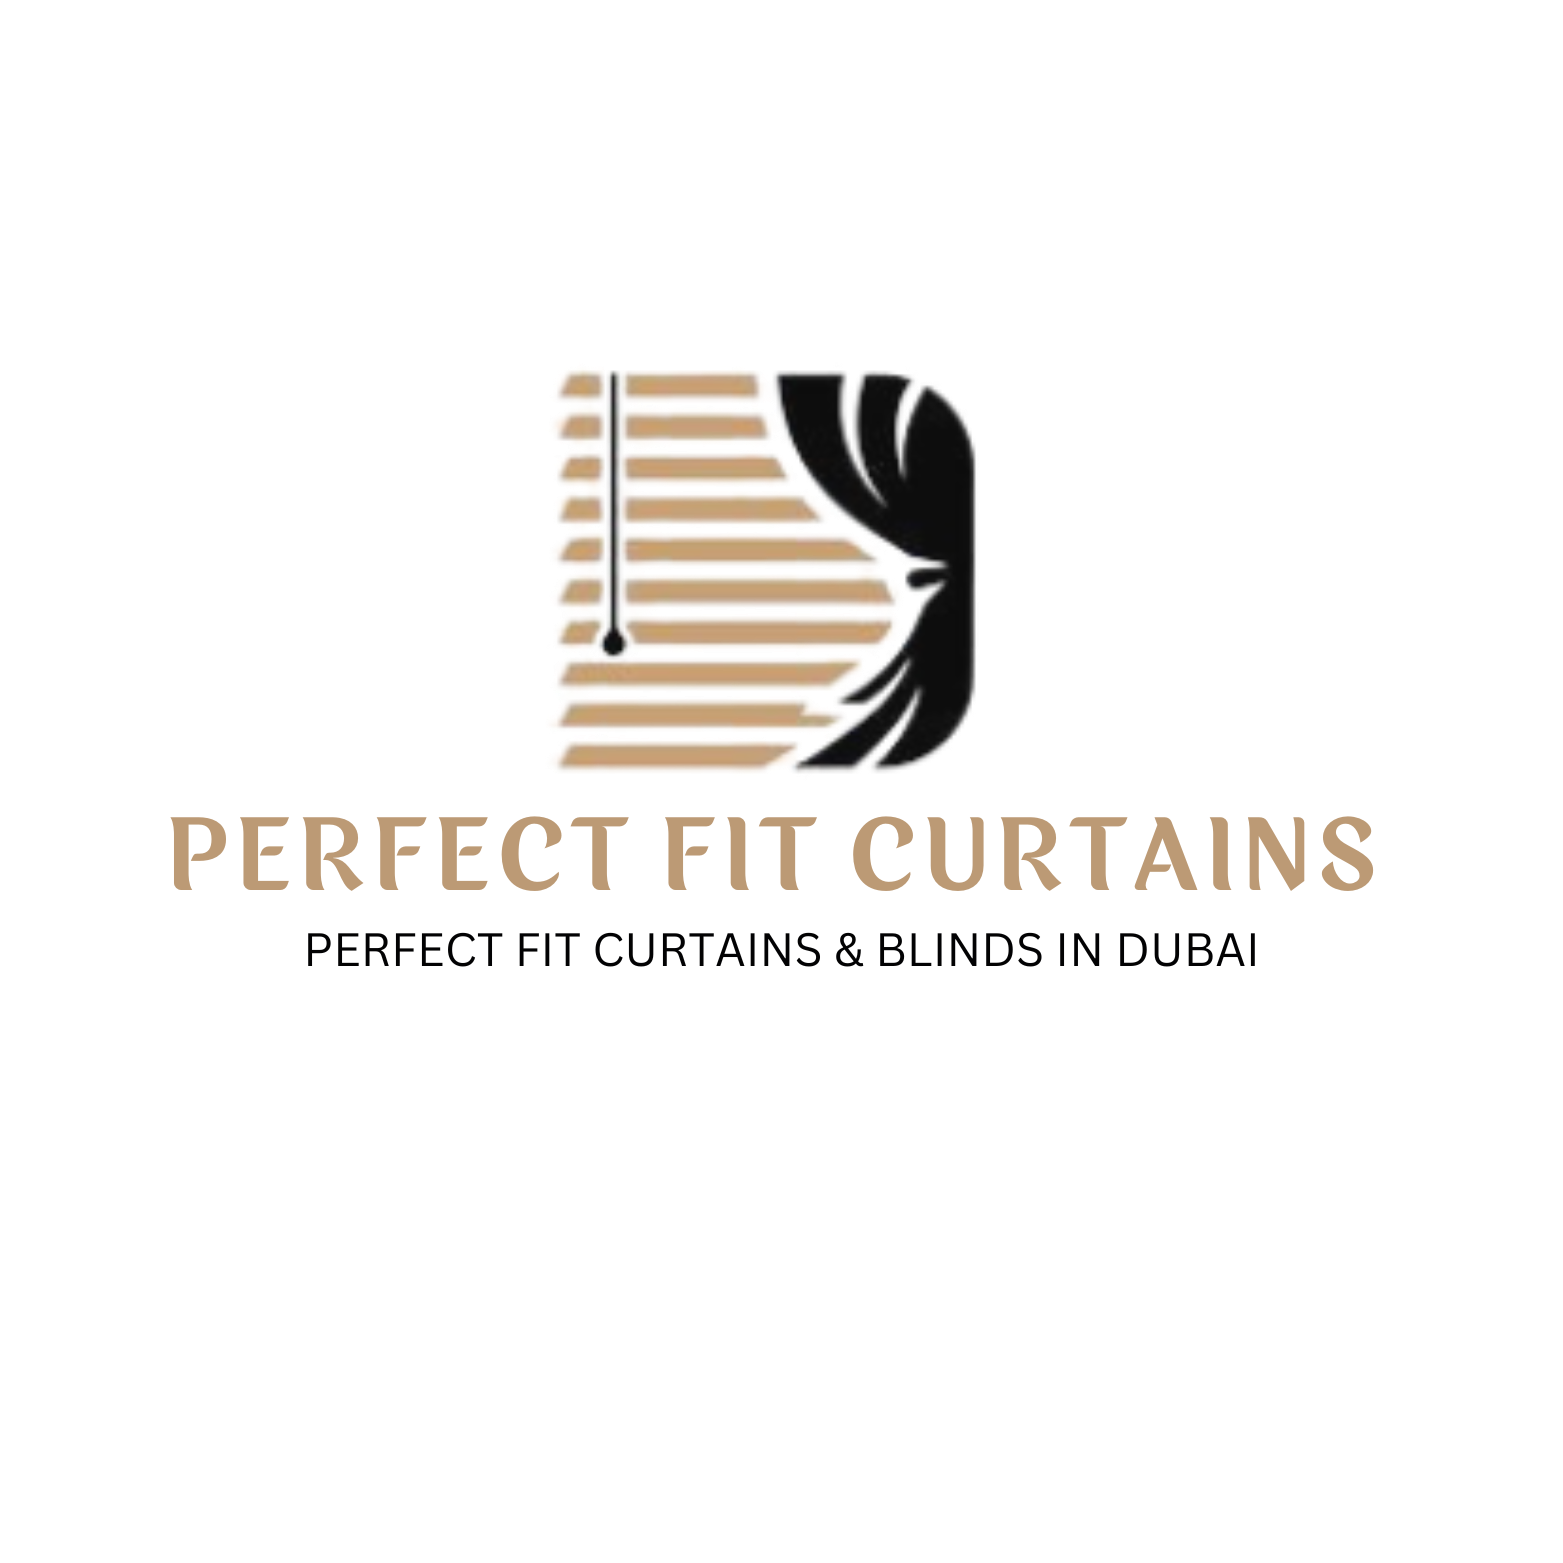 Perfect Fit Curtains and Blinds in Dubai